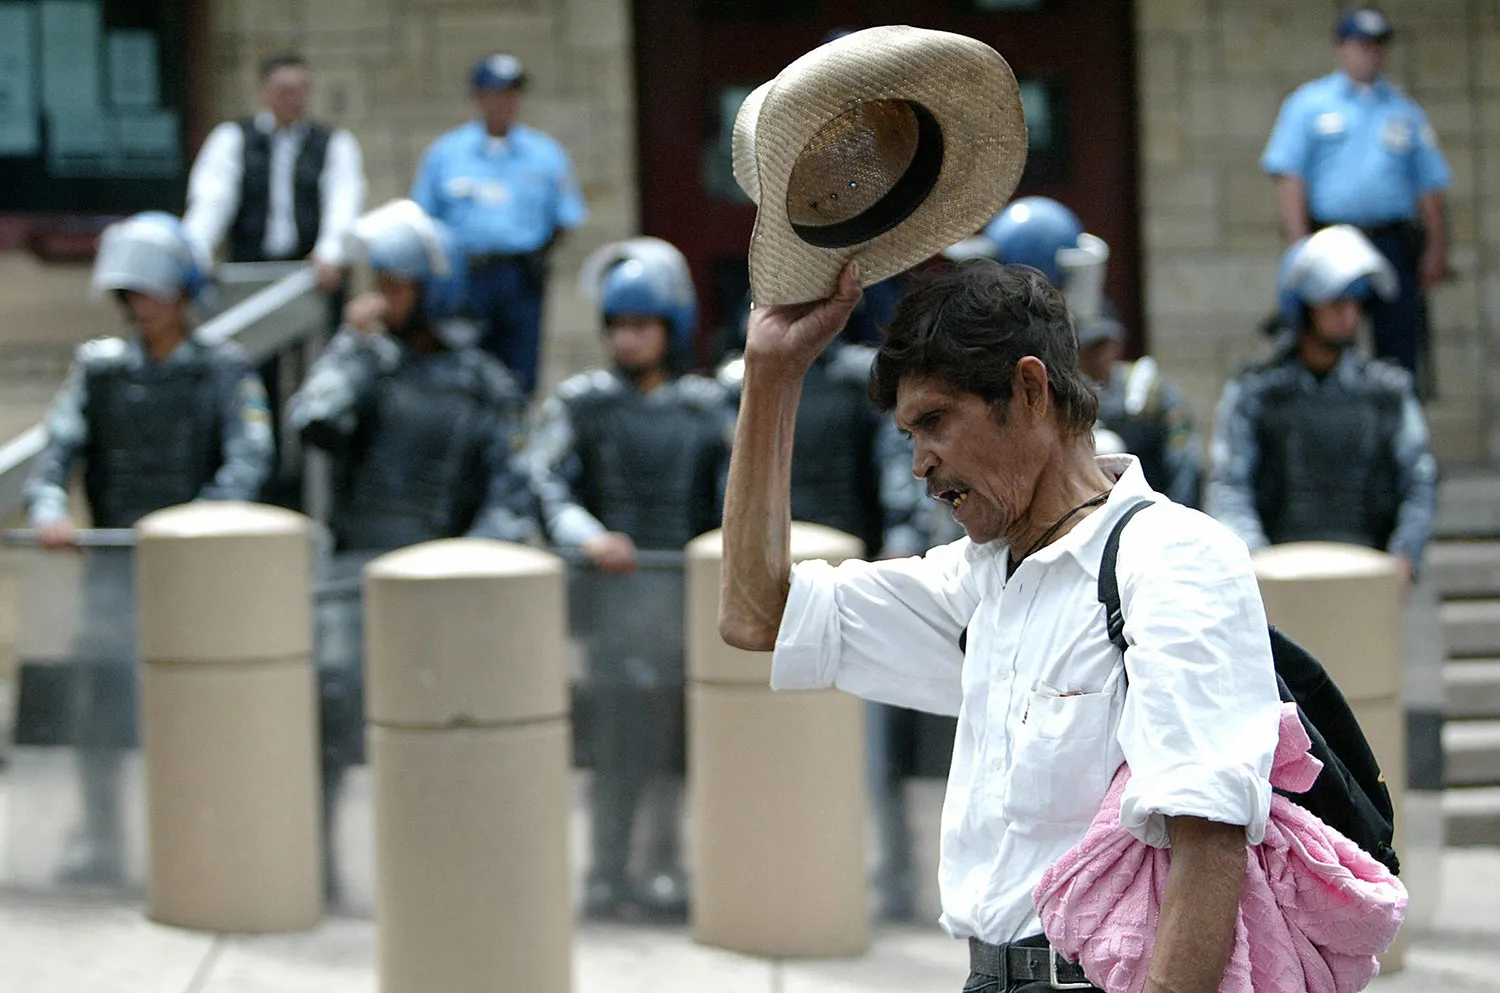 A Honduran man wearing a white shirt with sleeves rolled up and carrying a backpack lifts his straw hat and shouts as he protests in front of the U.S. Embassy in Tegucigalpa. Behind him and out of focus are traffic barriers and riot police in full gear and helmets.